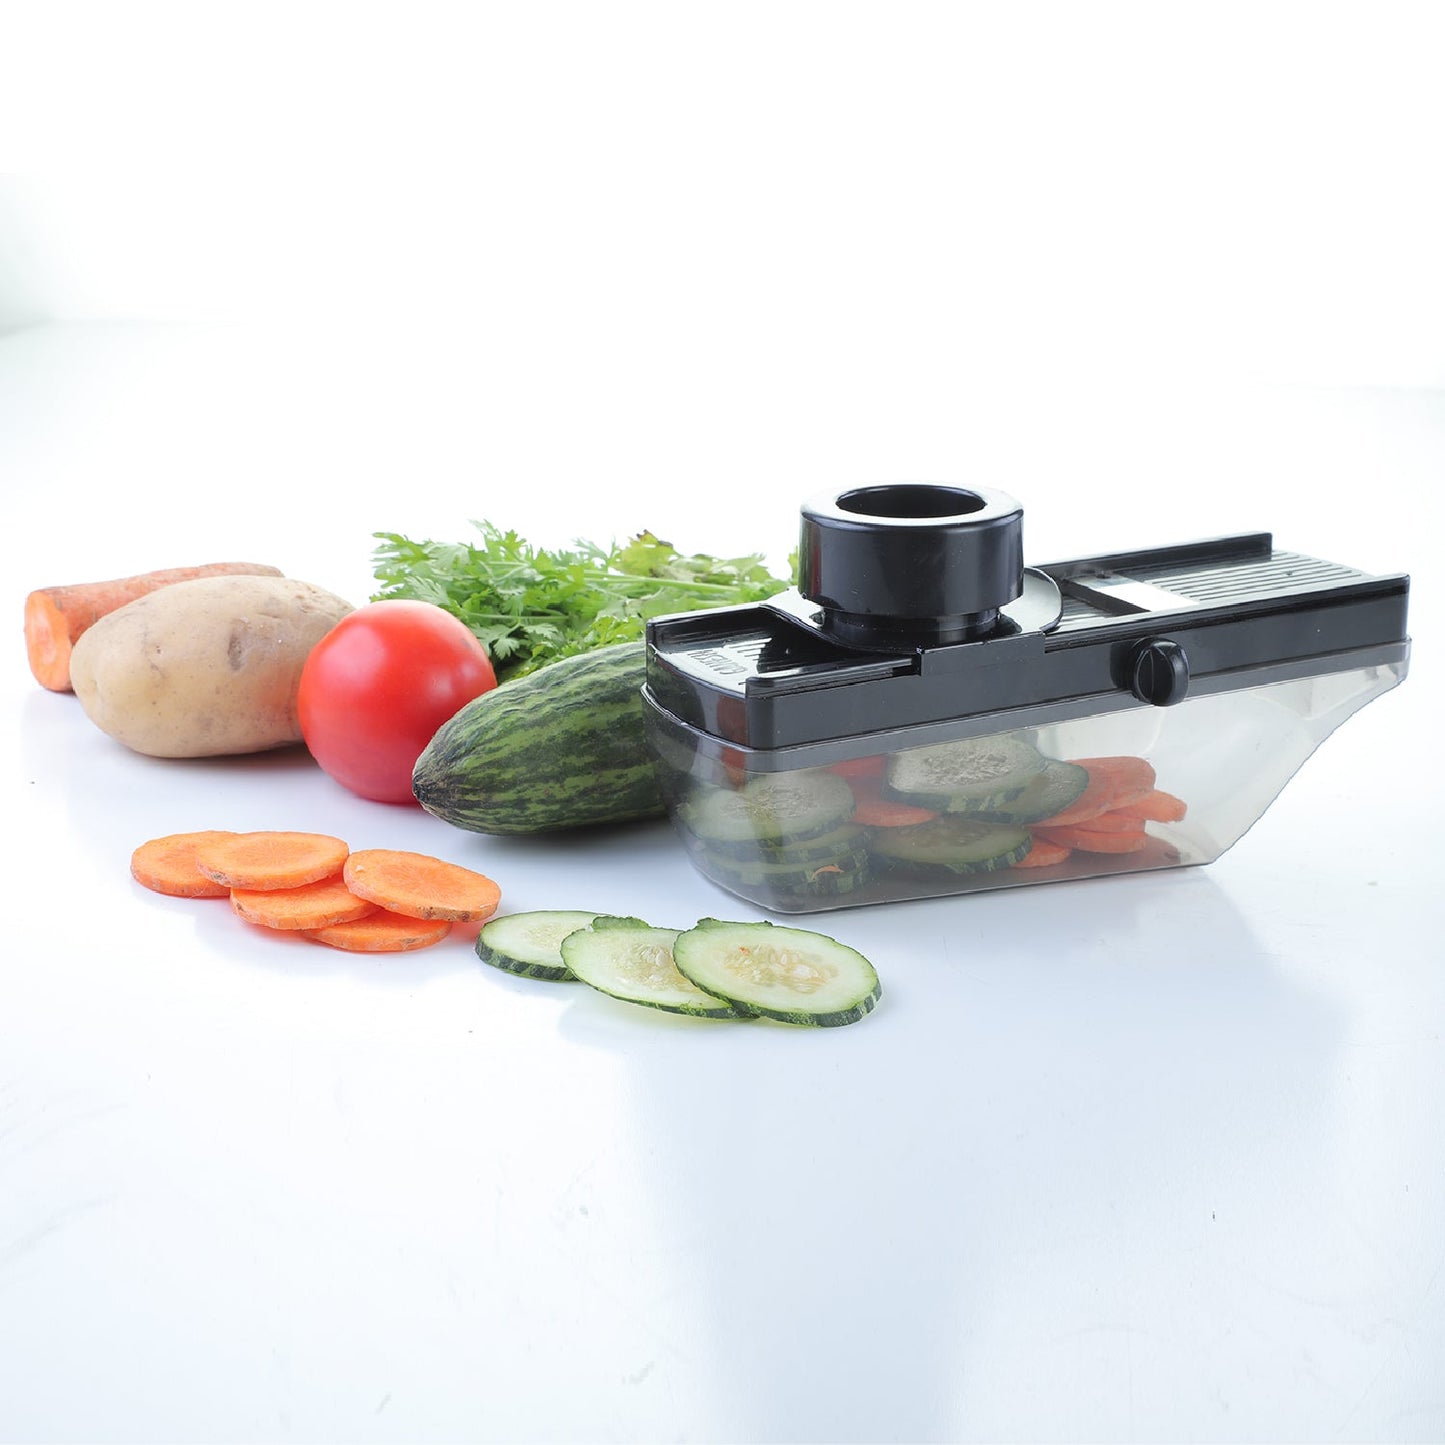 8101 Ganesh Plastic Vegetable Slicer Cutter, Black - SWASTIK CREATIONS The Trend Point SWASTIK CREATIONS The Trend Point